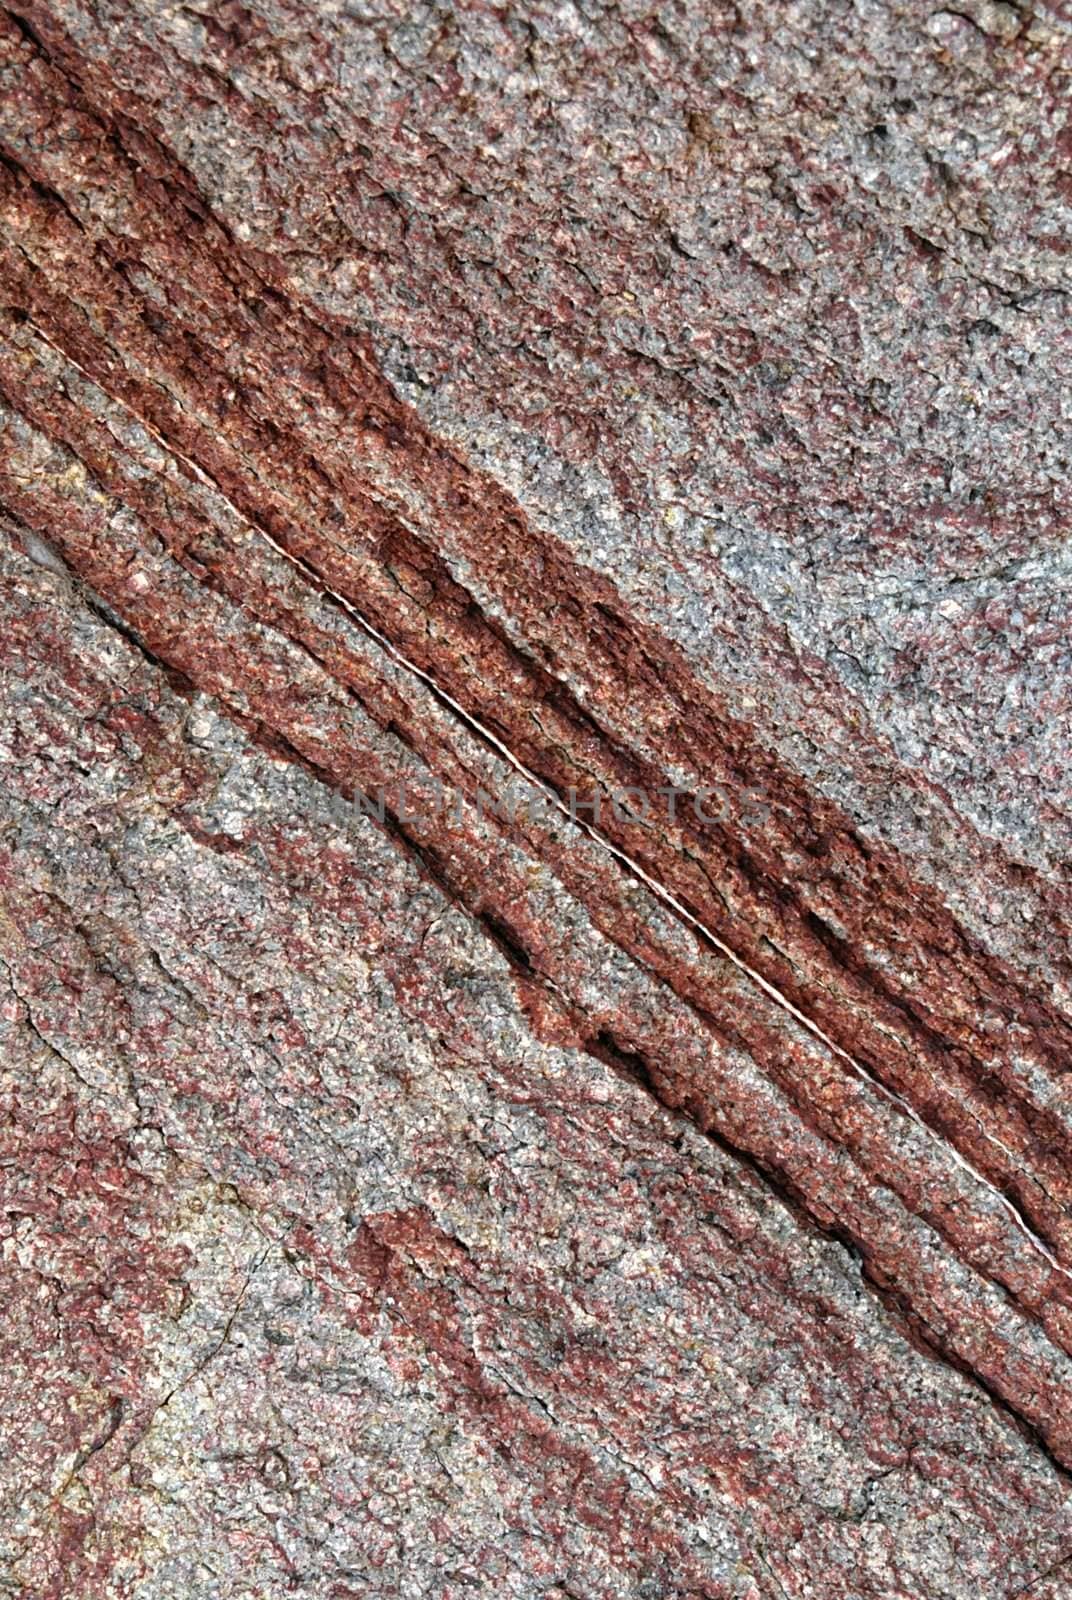 Natural stone texture with visible layers of sediment in lines